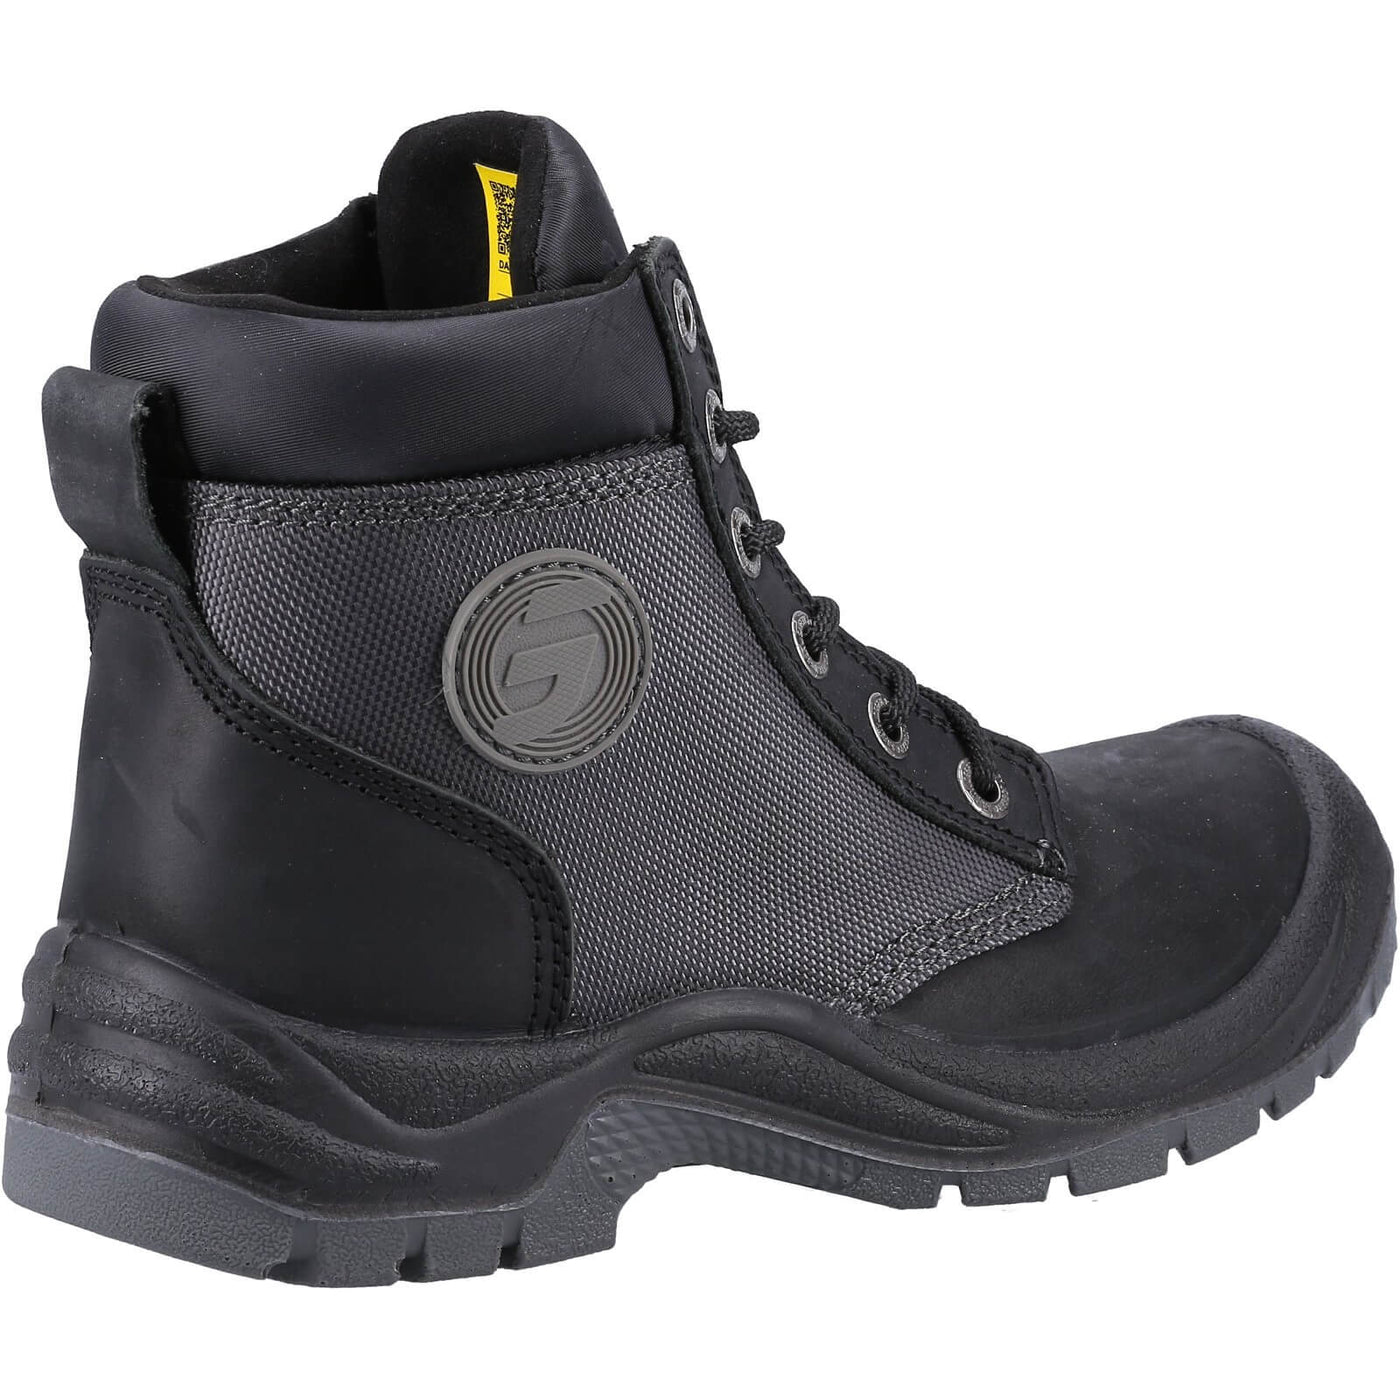 Safety Jogger Dakar Safety Work Boot - Work and Outdoor Wear